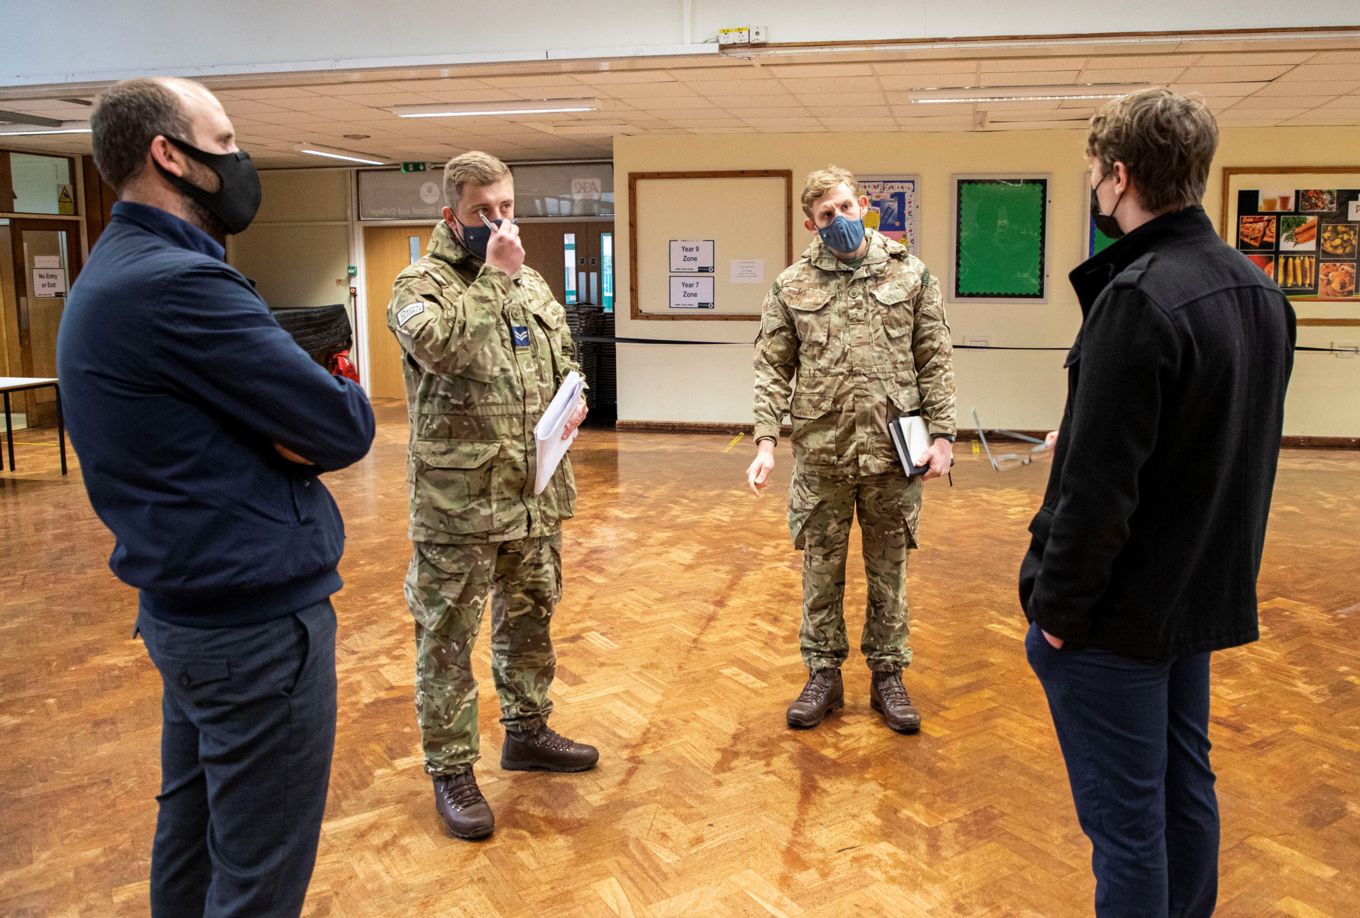 RAF Personnel talking with staff at Philip Morant School and College